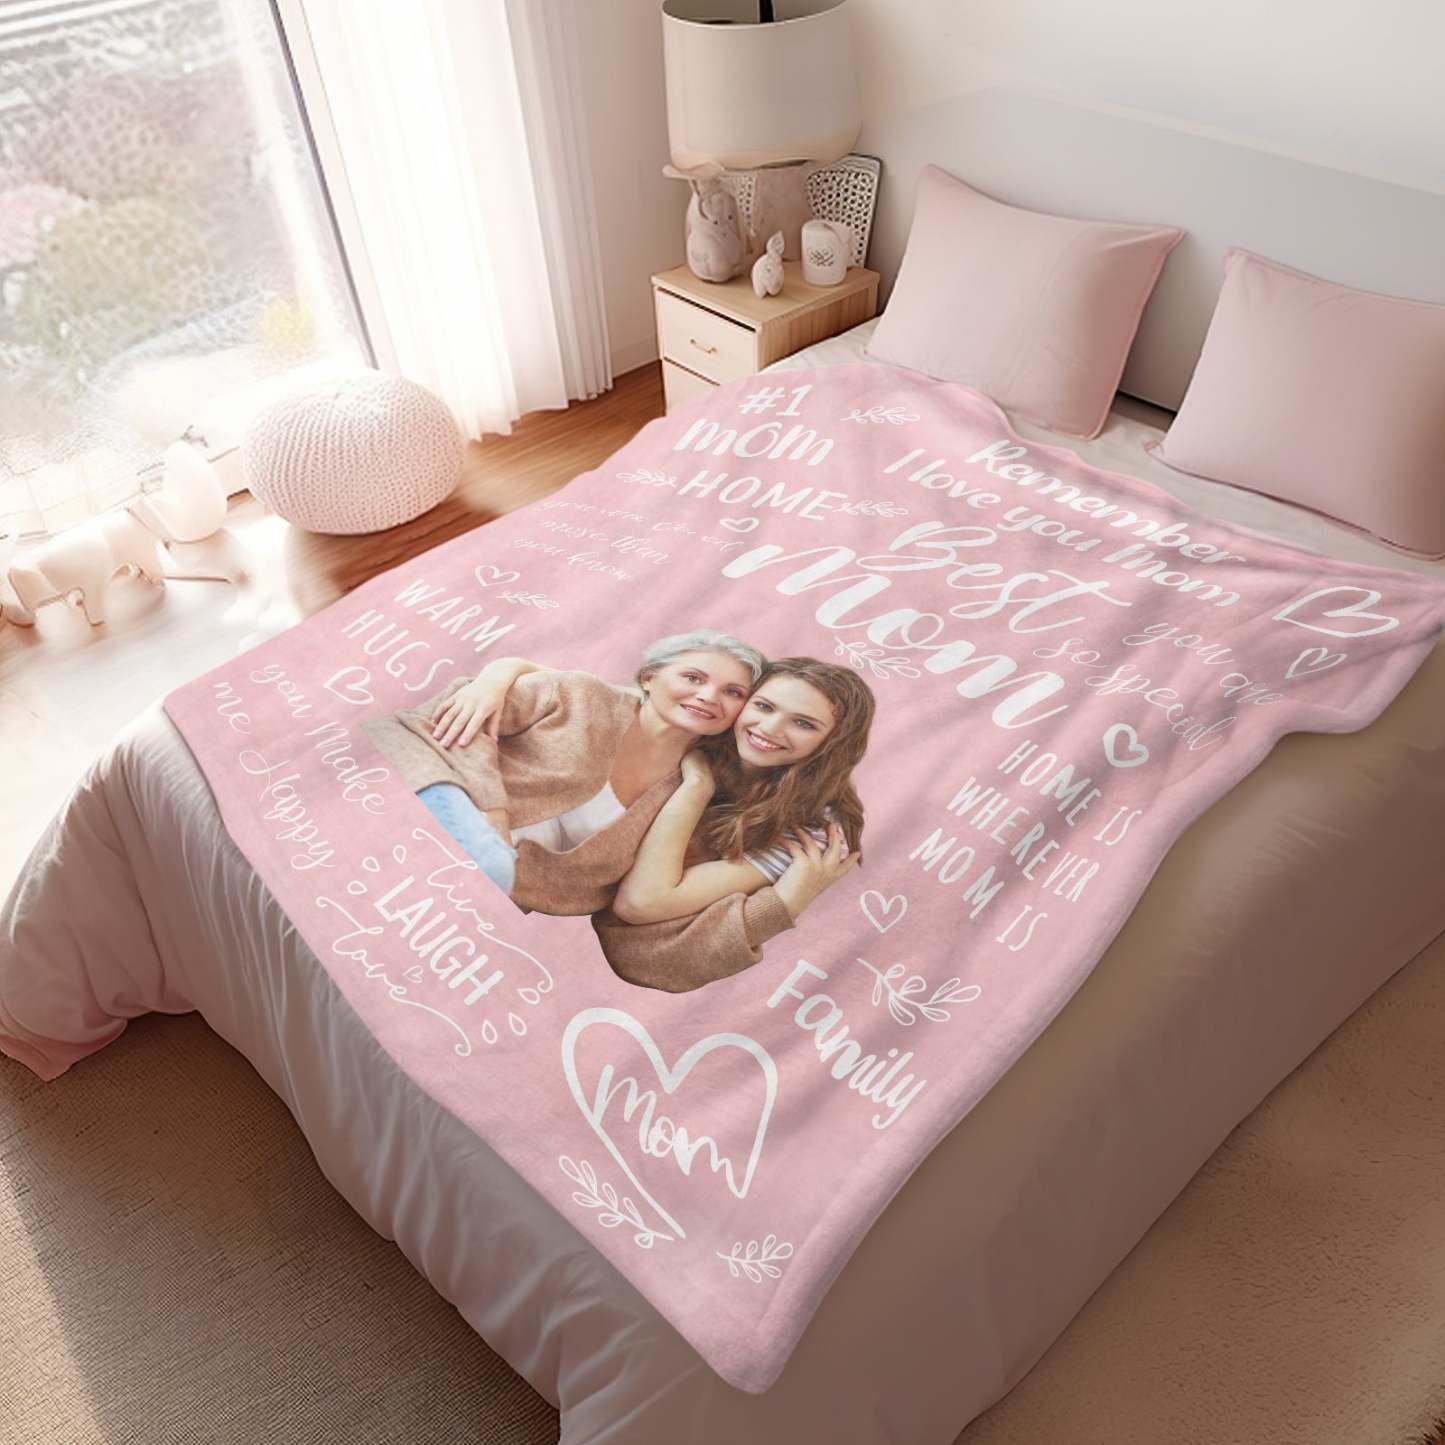 Personalized Photo Mom Theme Blanket Remember I Love You Mom Mother's Day Gift For Mom - Get Photo Blanket